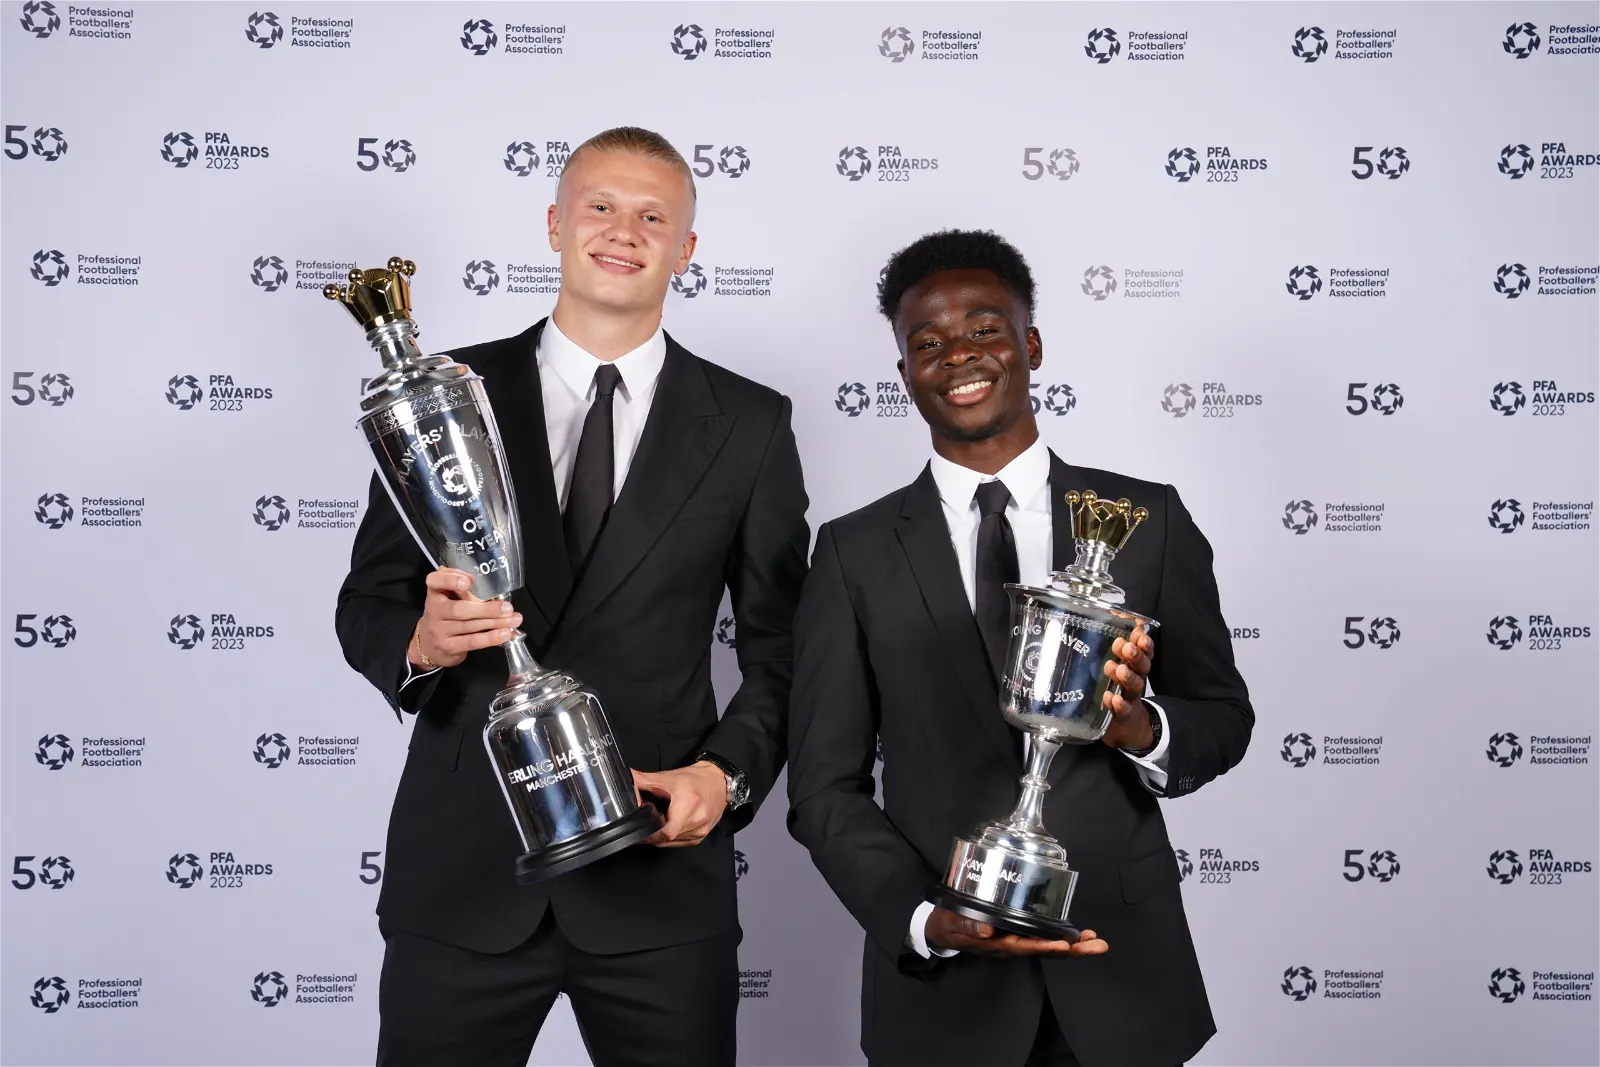 In a dazzling display of football excellence, the Professional Footballers' Association (PFA) celebrated the crème de la crème of English football in its 2023 awards ceremony.